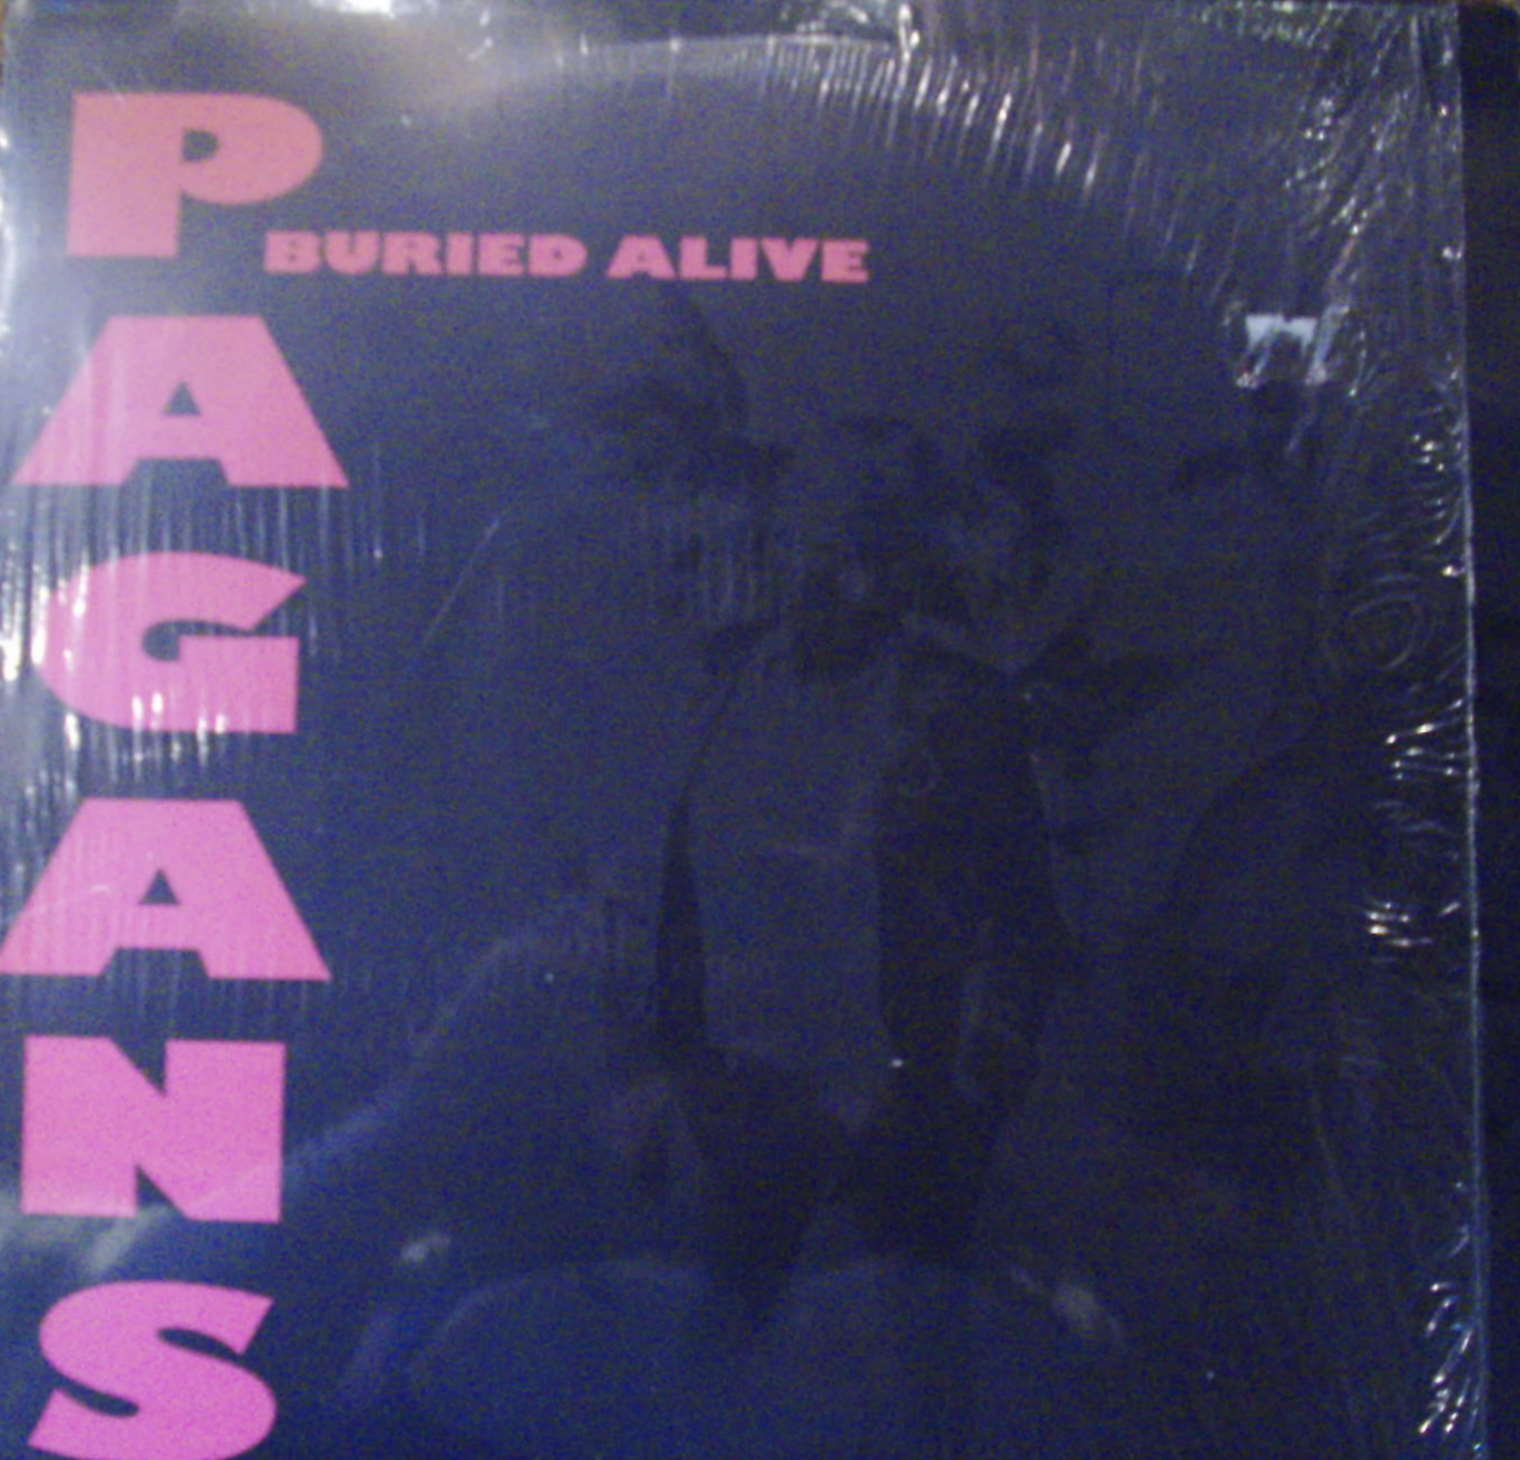 Pagans / Buried Alive